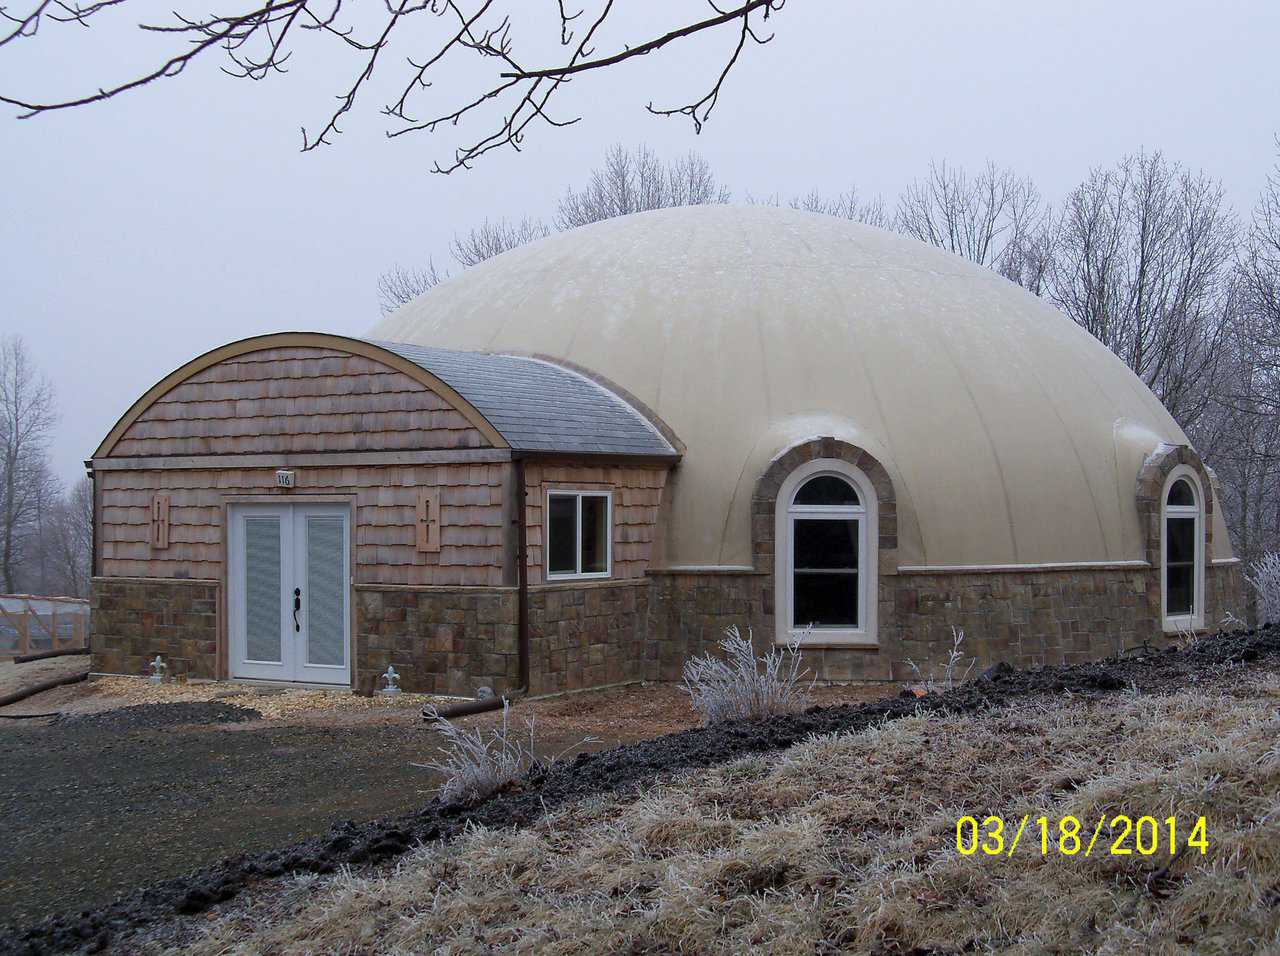 The trimmed out dome is spectacular. Note the rock wainscoat and the wood covered entryway. These really make the home beautiful for many generations.